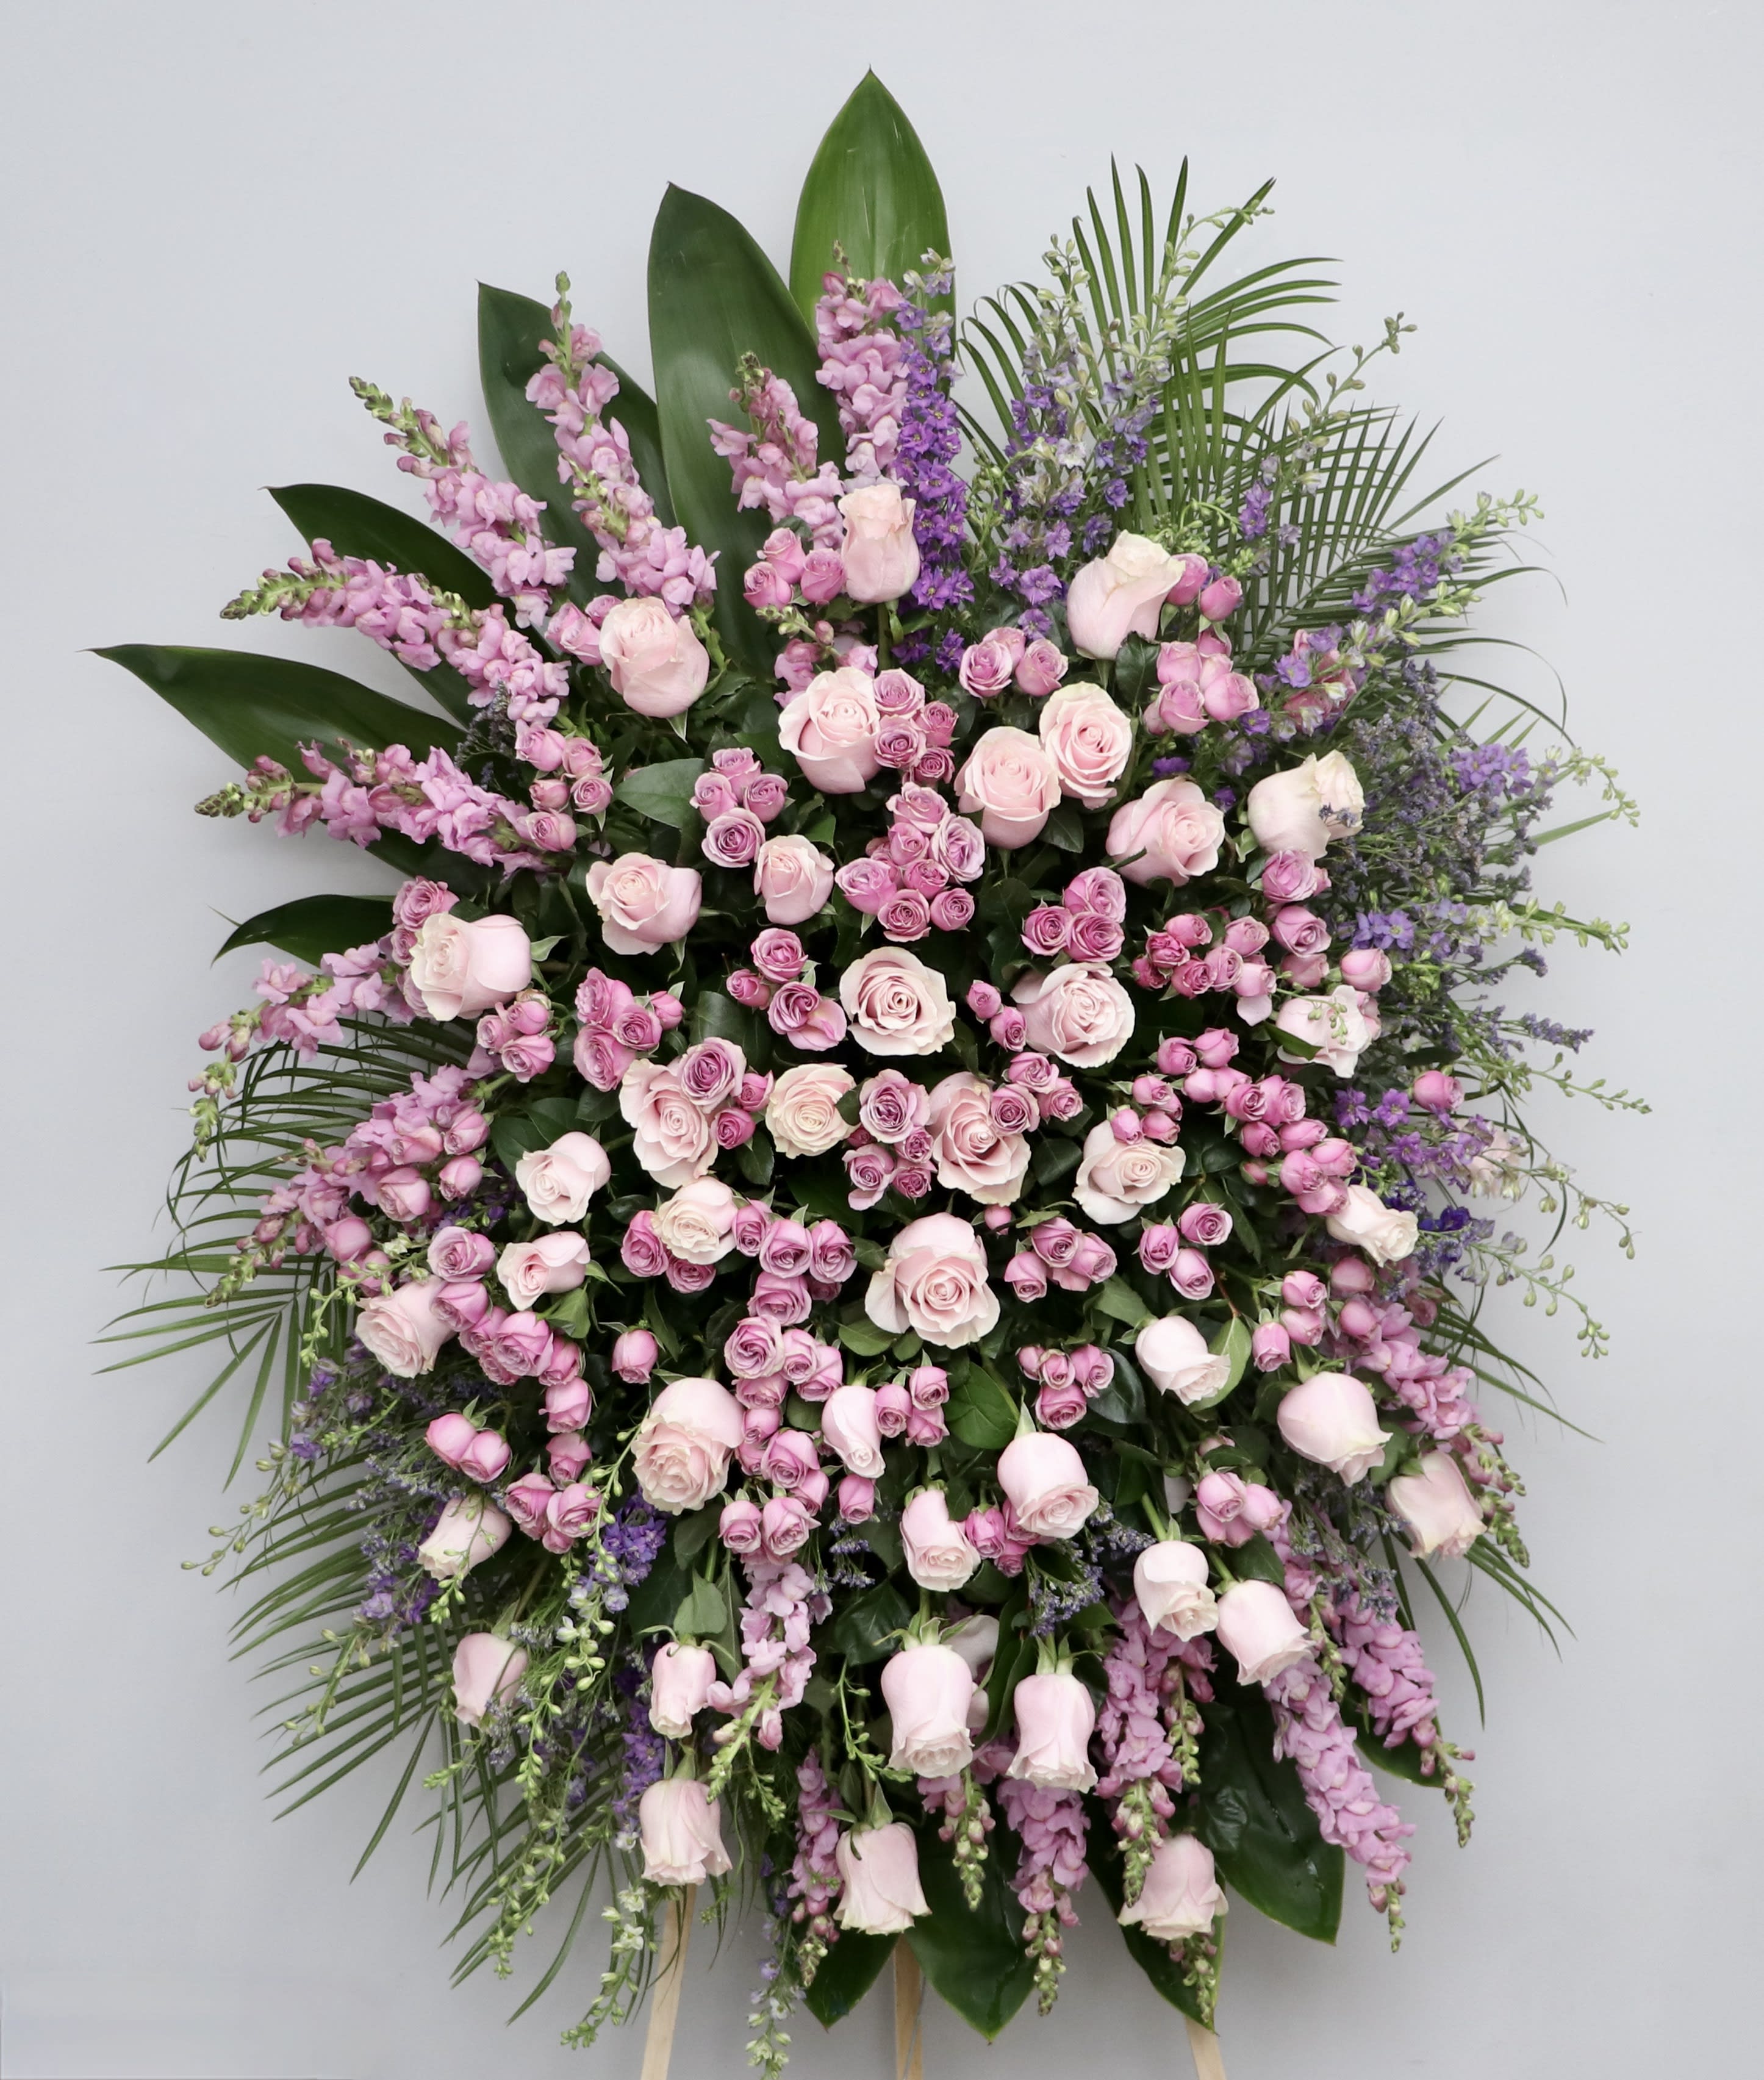 Pink and Lavender Spray  - This spray contains a mix of pinks and lavender. All surrounded by seasonal greens.  We include easel, printed banner and delivery (some fees may apply).  Standard size is 30'' wide, deluxe is 36'', and premium is 42''.